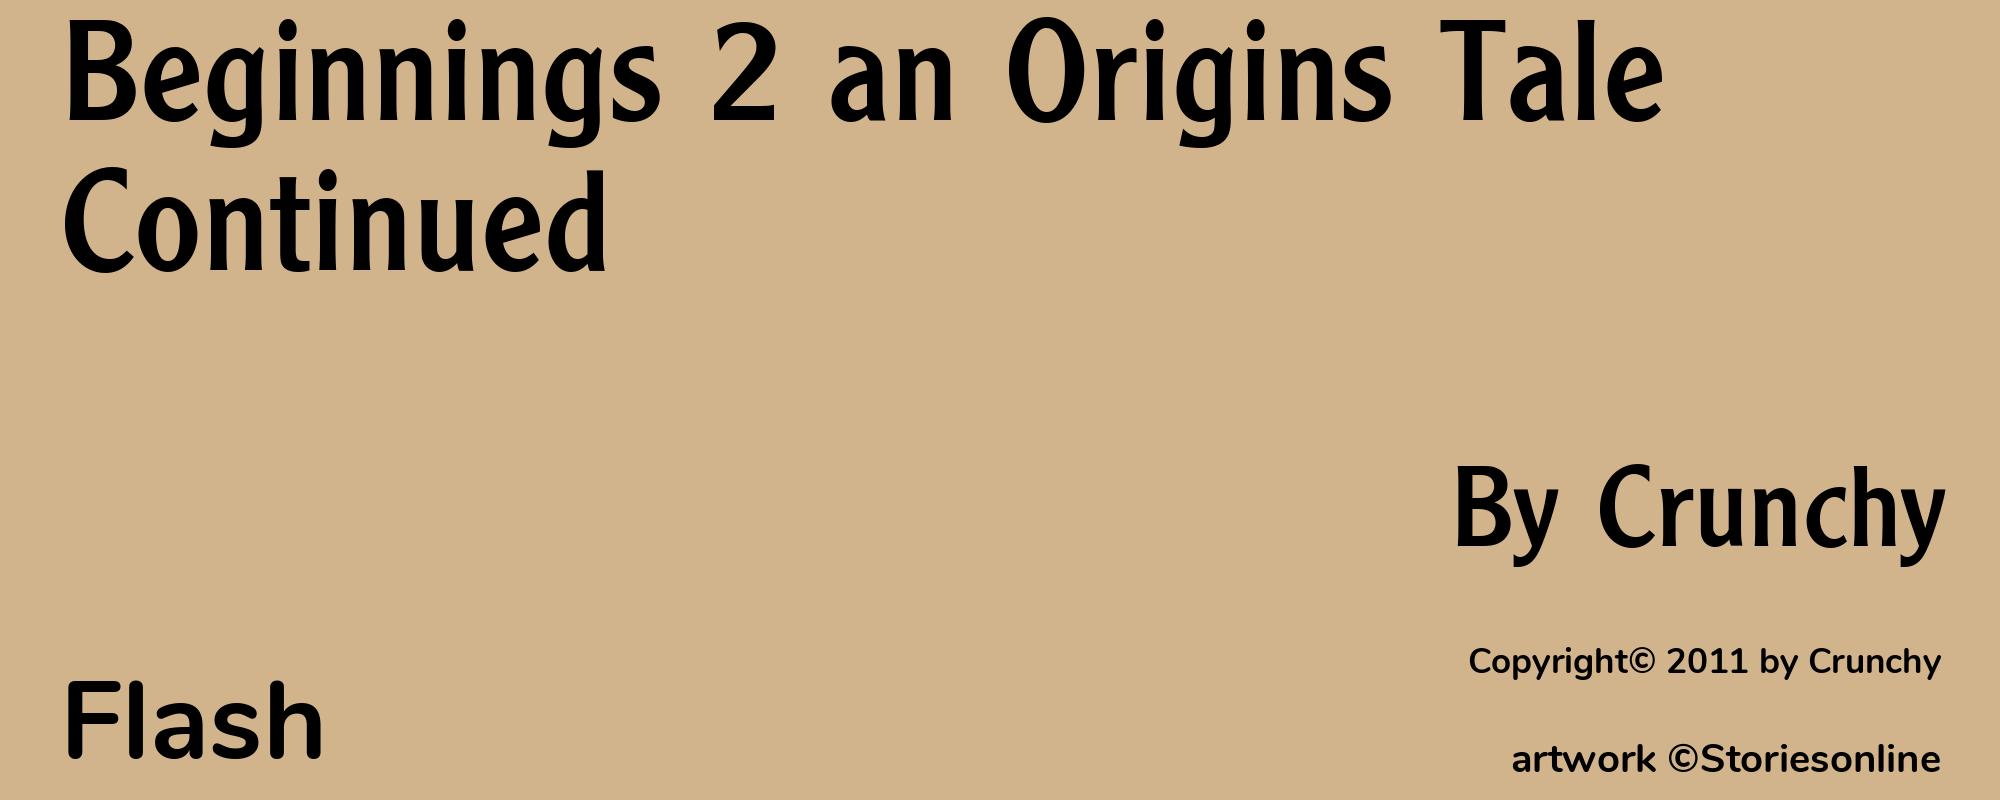 Beginnings 2 an Origins Tale Continued - Cover